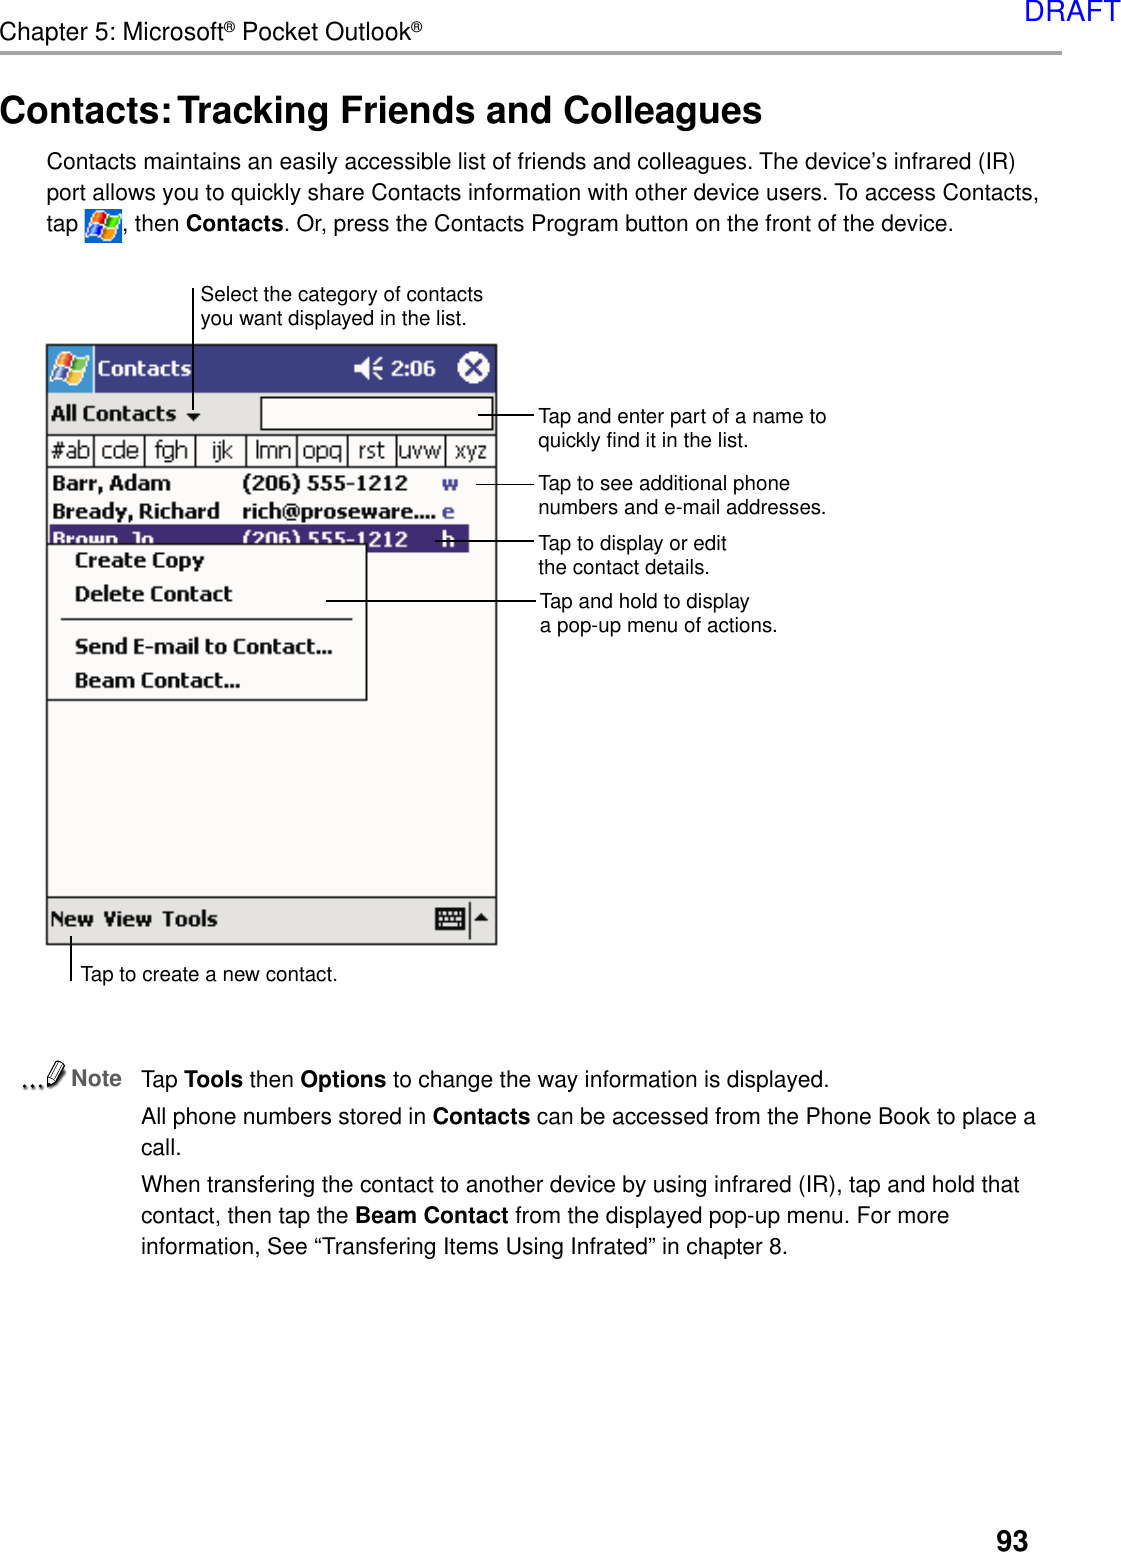 93Chapter 5: Microsoft® Pocket Outlook®Contacts: Tracking Friends and ColleaguesContacts maintains an easily accessible list of friends and colleagues. The device’s infrared (IR)port allows you to quickly share Contacts information with other device users. To access Contacts,tap  , then Contacts. Or, press the Contacts Program button on the front of the device.NoteTap Tools then Options to change the way information is displayed.All phone numbers stored in Contacts can be accessed from the Phone Book to place acall.When transfering the contact to another device by using infrared (IR), tap and hold thatcontact, then tap the Beam Contact from the displayed pop-up menu. For moreinformation, See “Transfering Items Using Infrated” in chapter 8.Tap and enter part of a name toquickly find it in the list.   Tap to display or editthe contact details.Tap and hold to displaya pop-up menu of actions.Tap to see additional phonenumbers and e-mail addresses.Tap to create a new contact.Select the category of contactsyou want displayed in the list.DRAFT